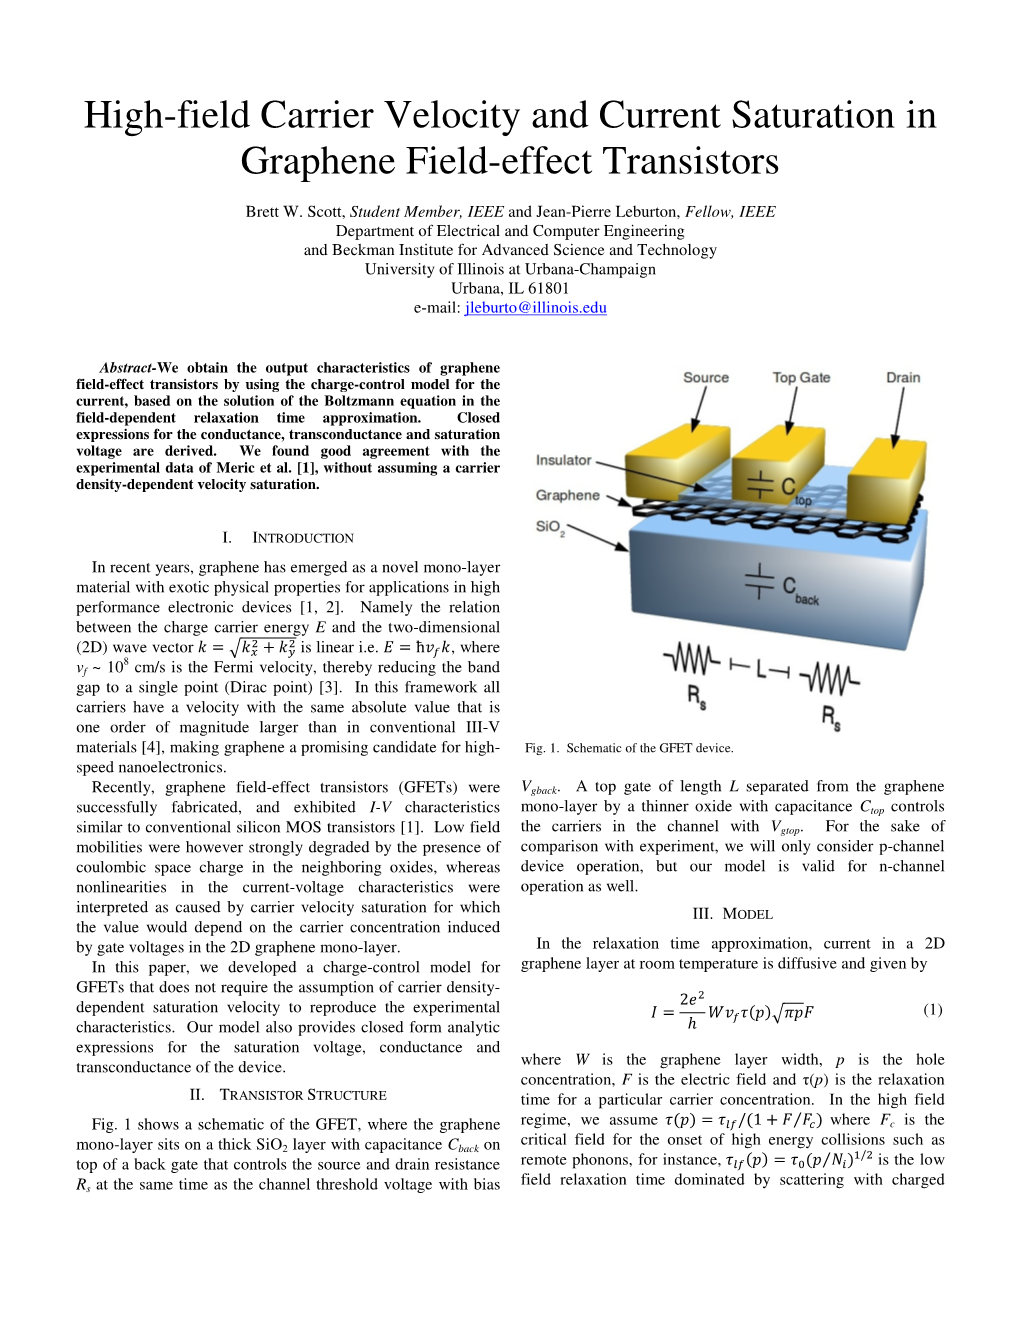 High-Field Carrier Velocity and Current Saturation in Graphene Field-Effect Transistors